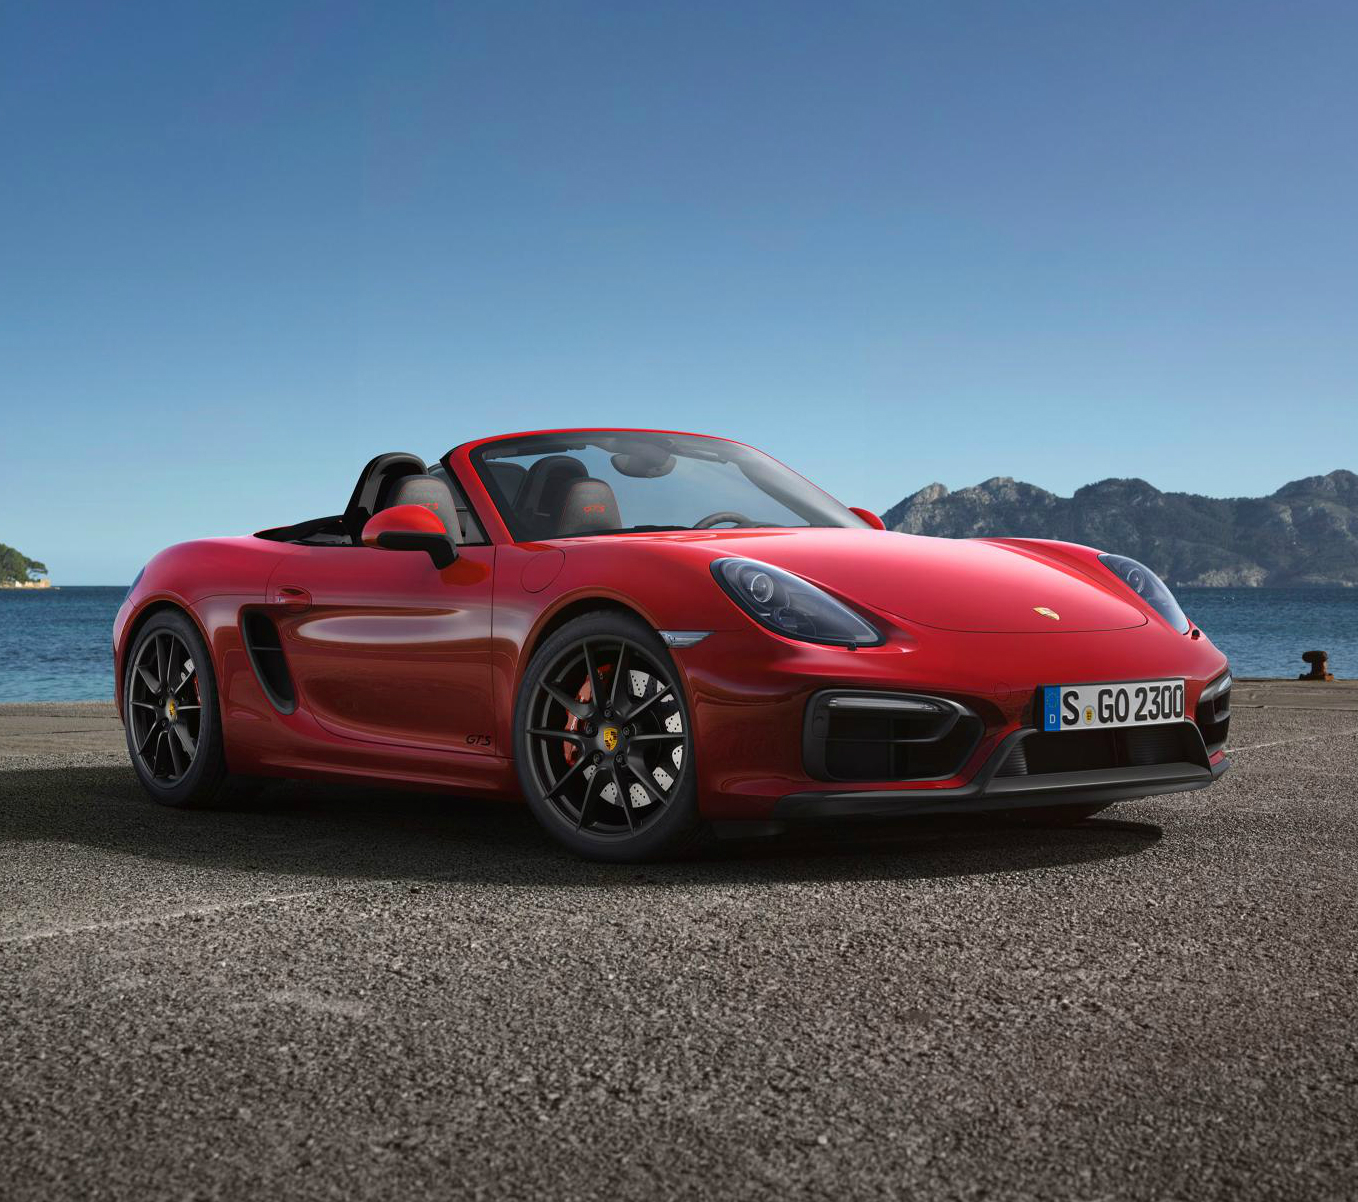 Porsche Boxster buying guide, including the 986, 987 and 981 models and GTS and Spyder